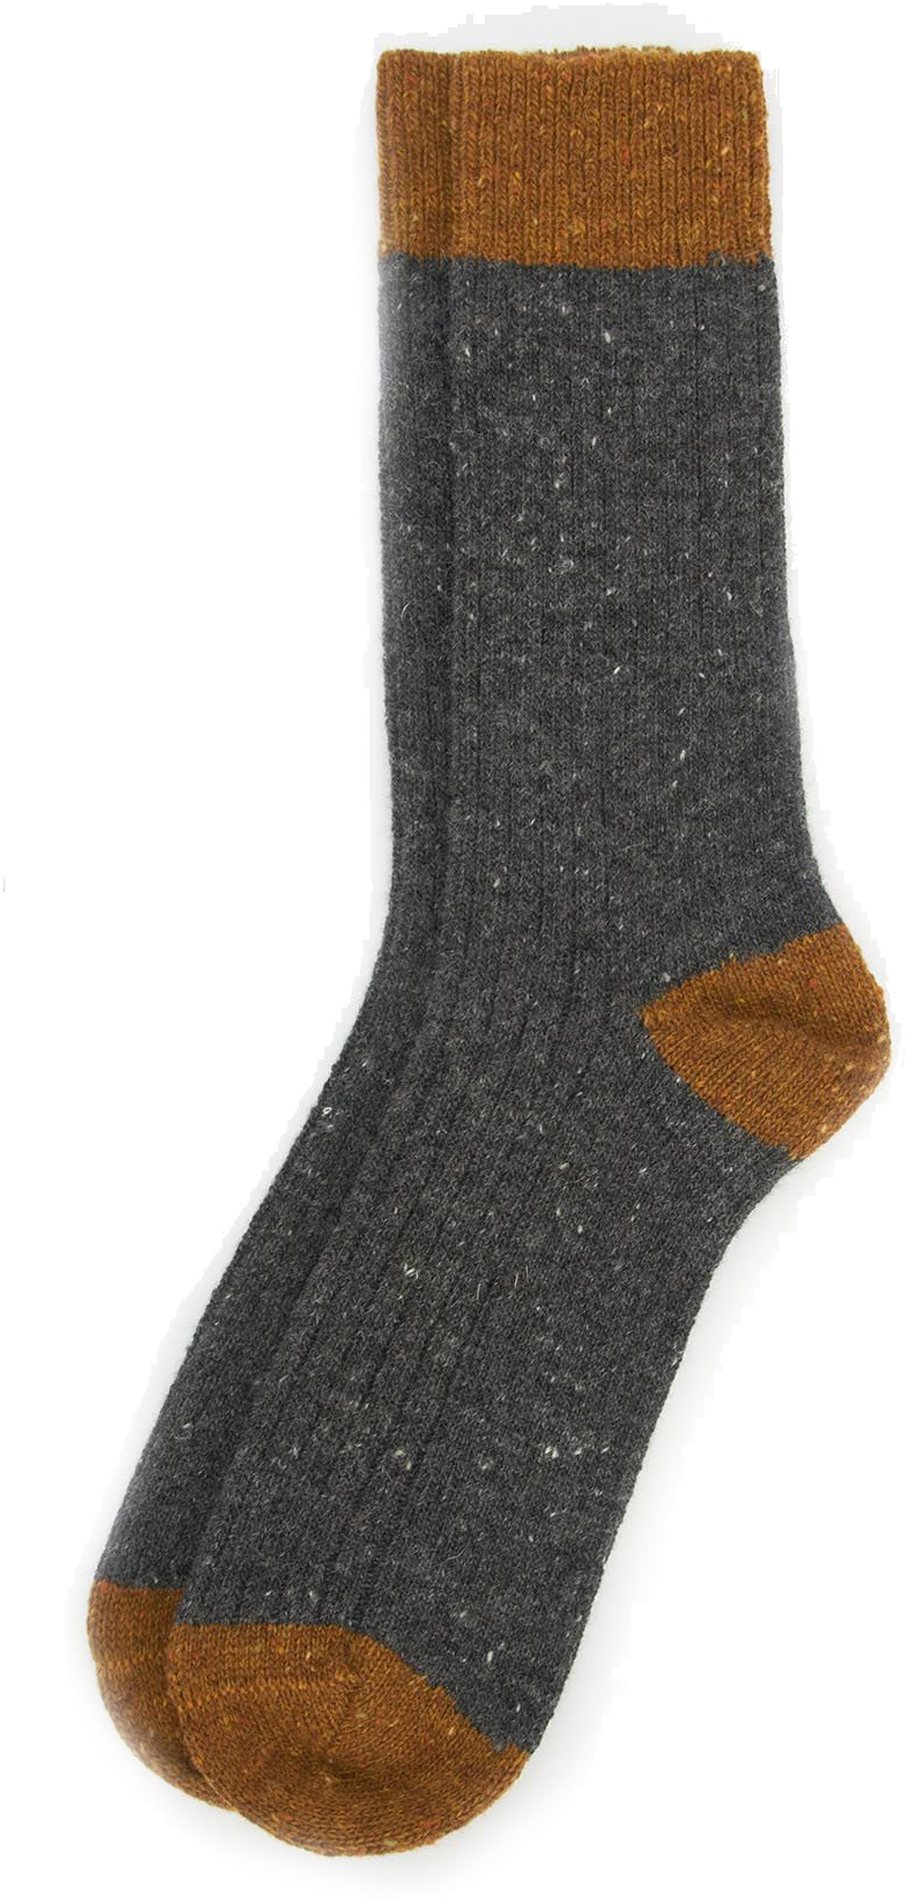 Barbour Houghton Sock Charcoal/Ochre MSO0091CH71 - Socks - Humphries Shoes